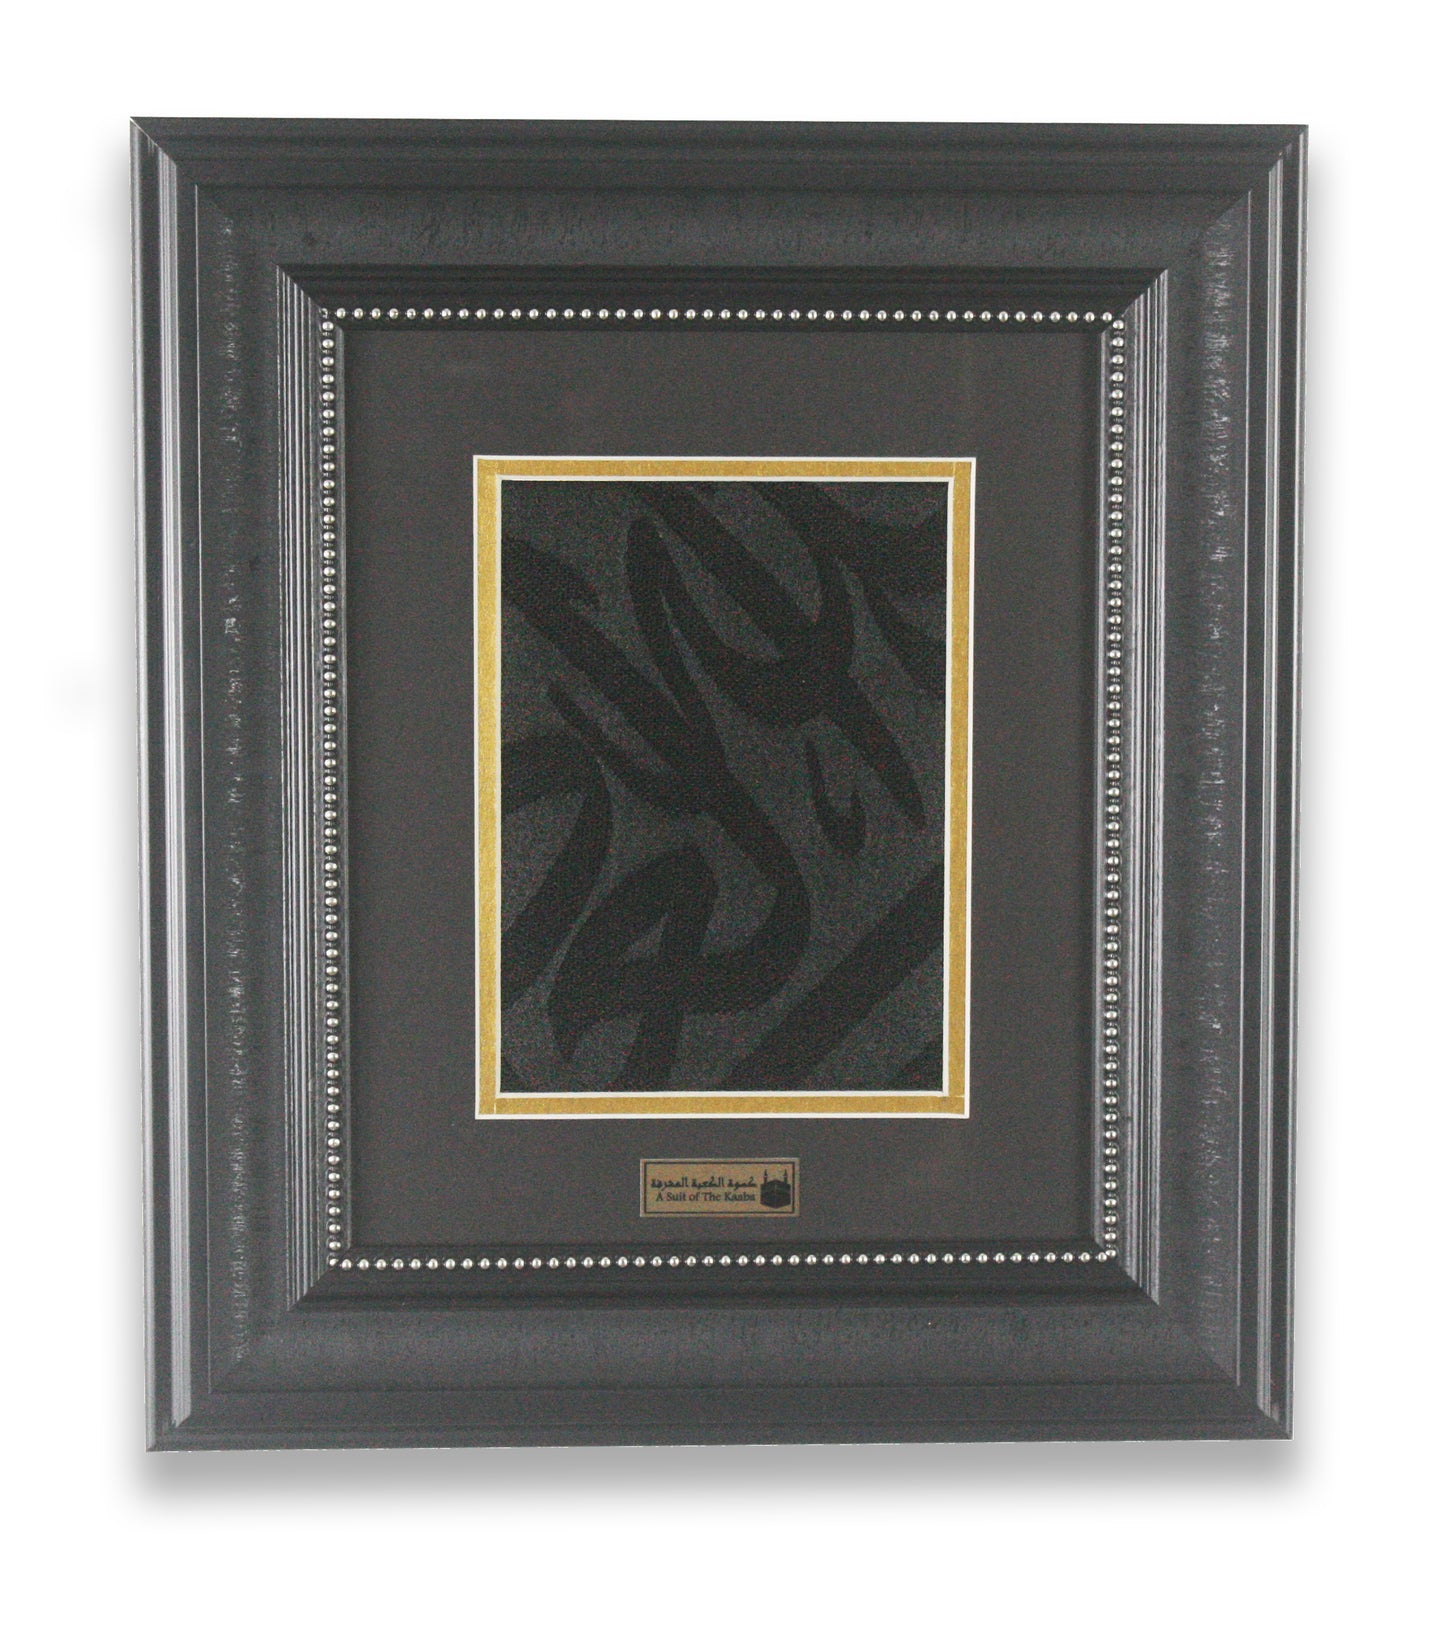 Framed and Certified Holy Kaaba Covering Fragment, Best Gift For Muslim Friend